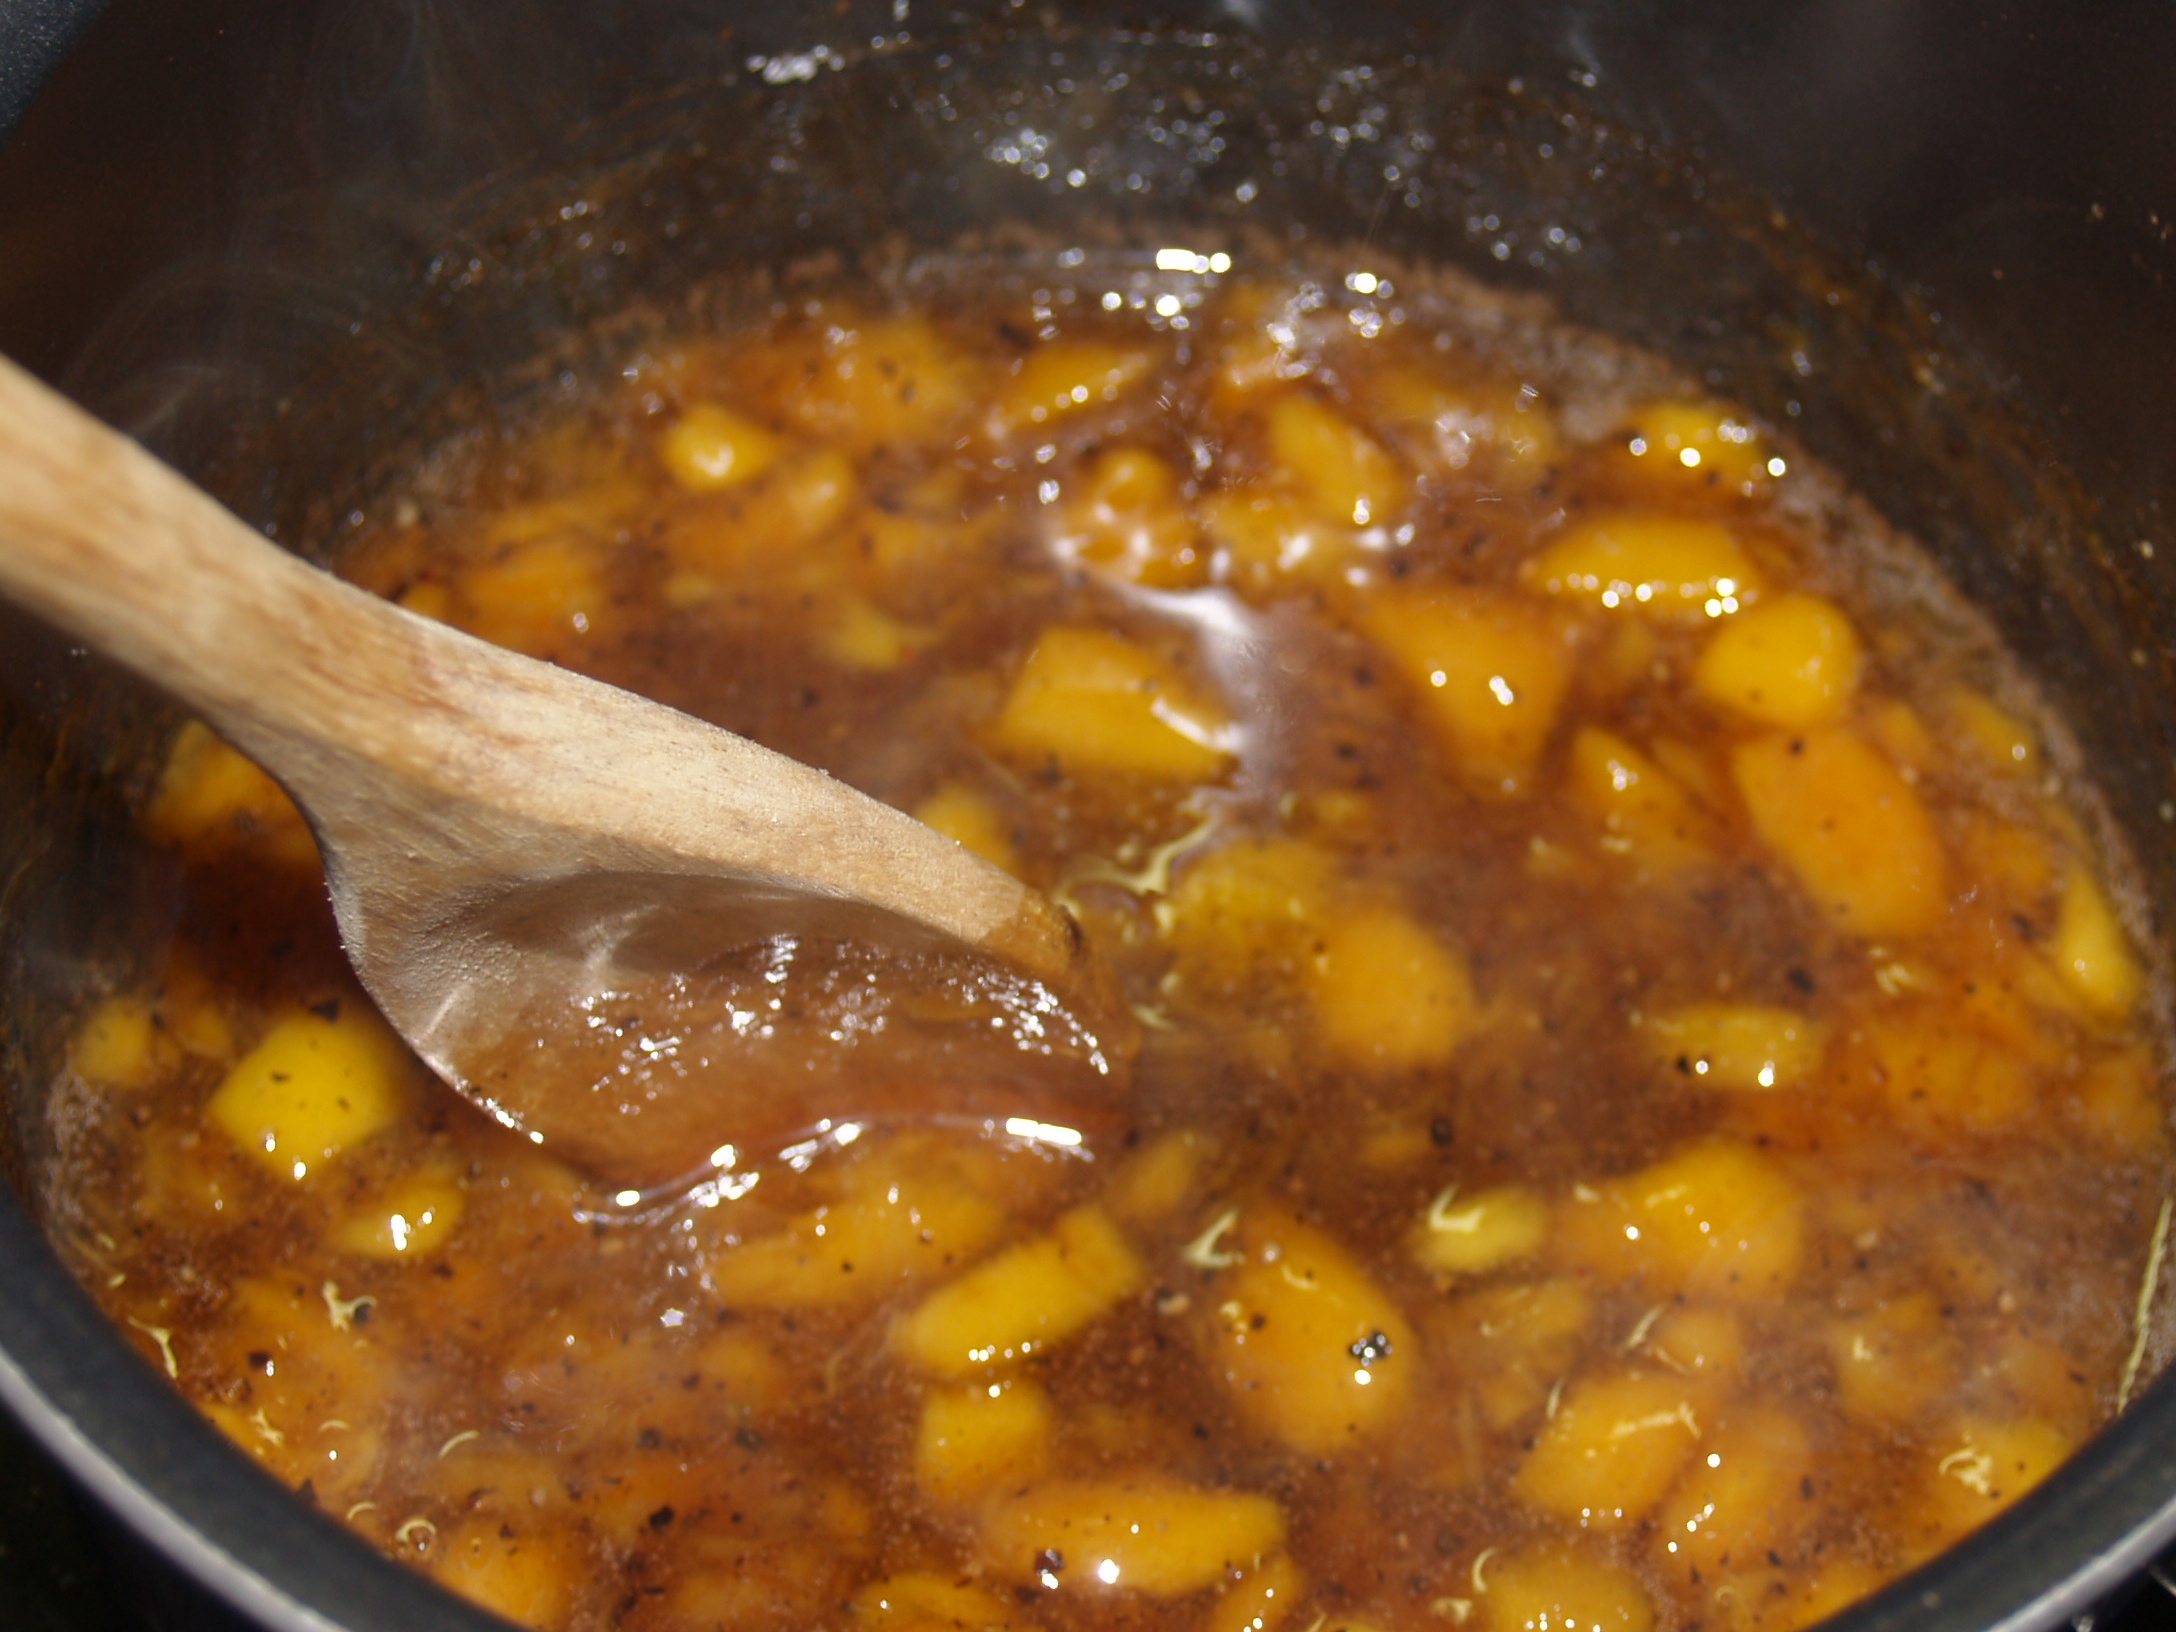 Peachy Piquant Jam from Kelli's Kitchen